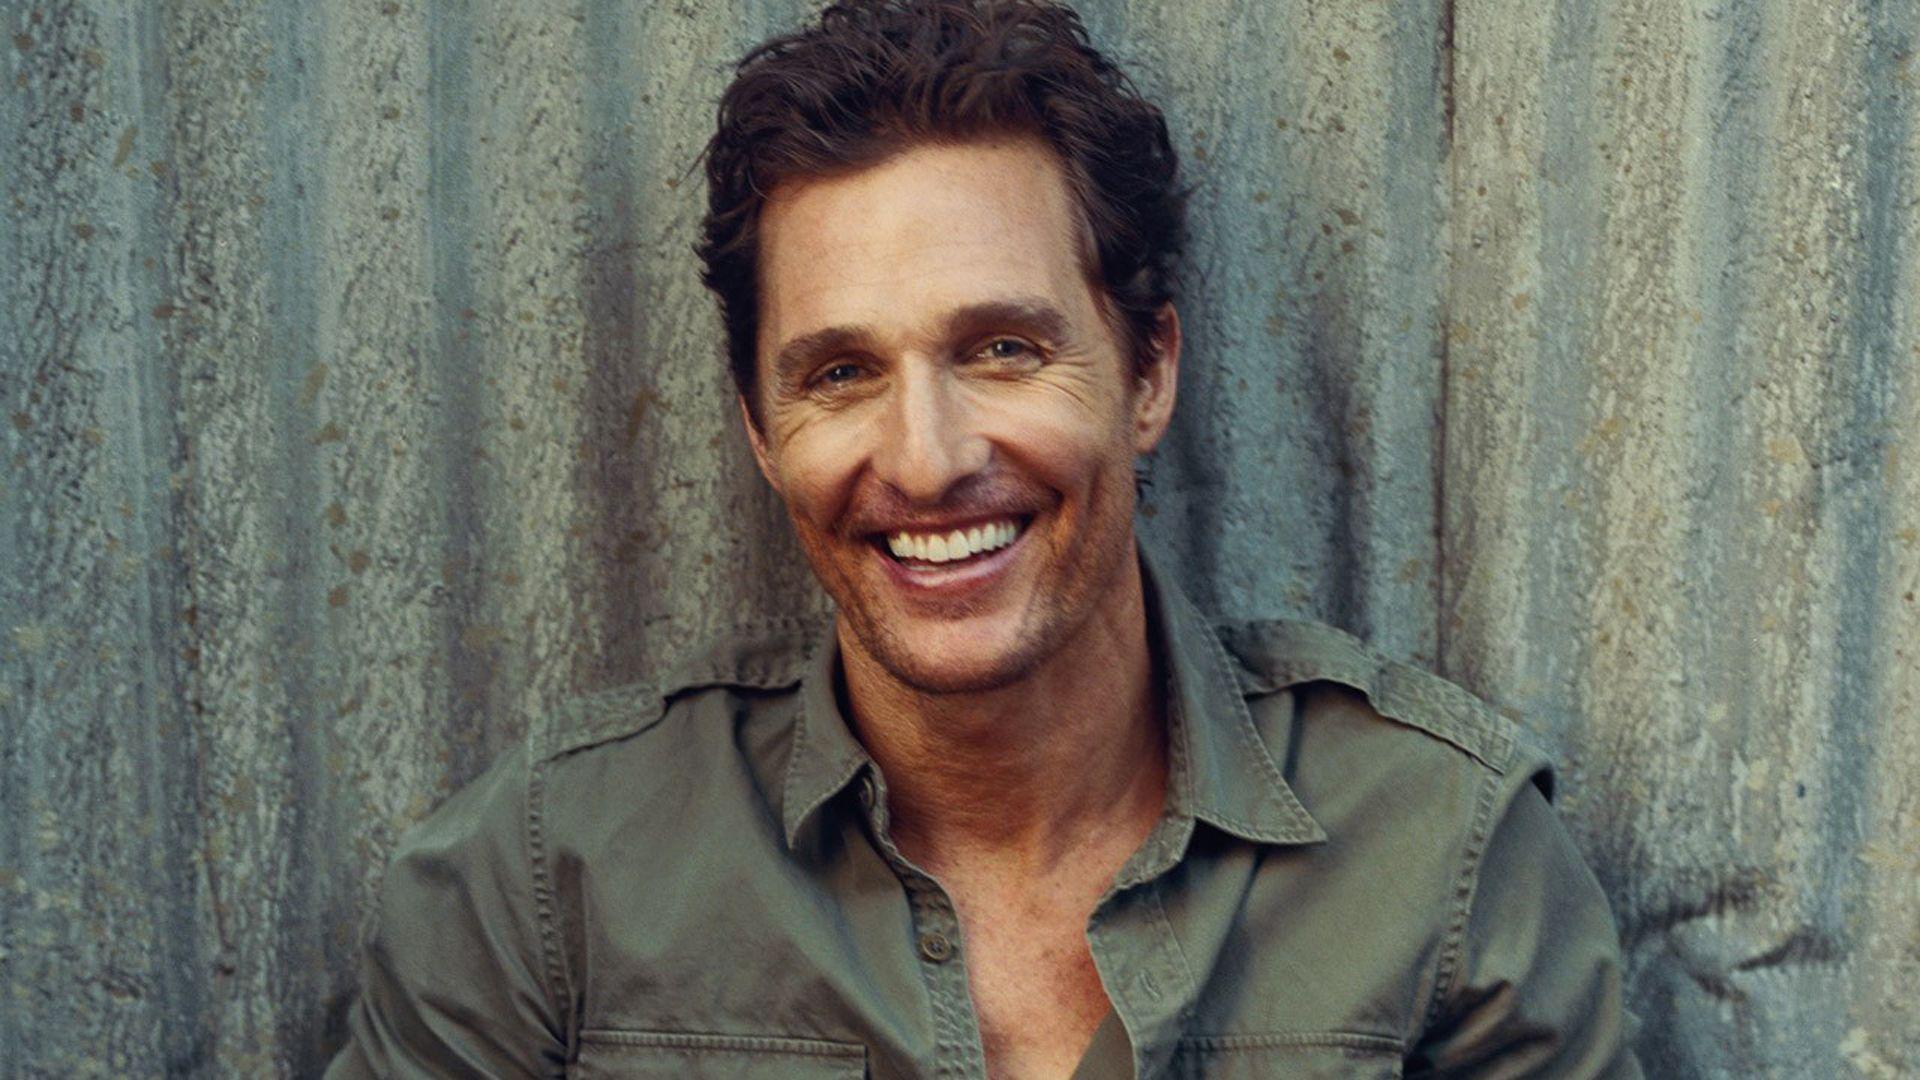 Matthew Mcconaughey Wallpaper. Free Pics Download For Android